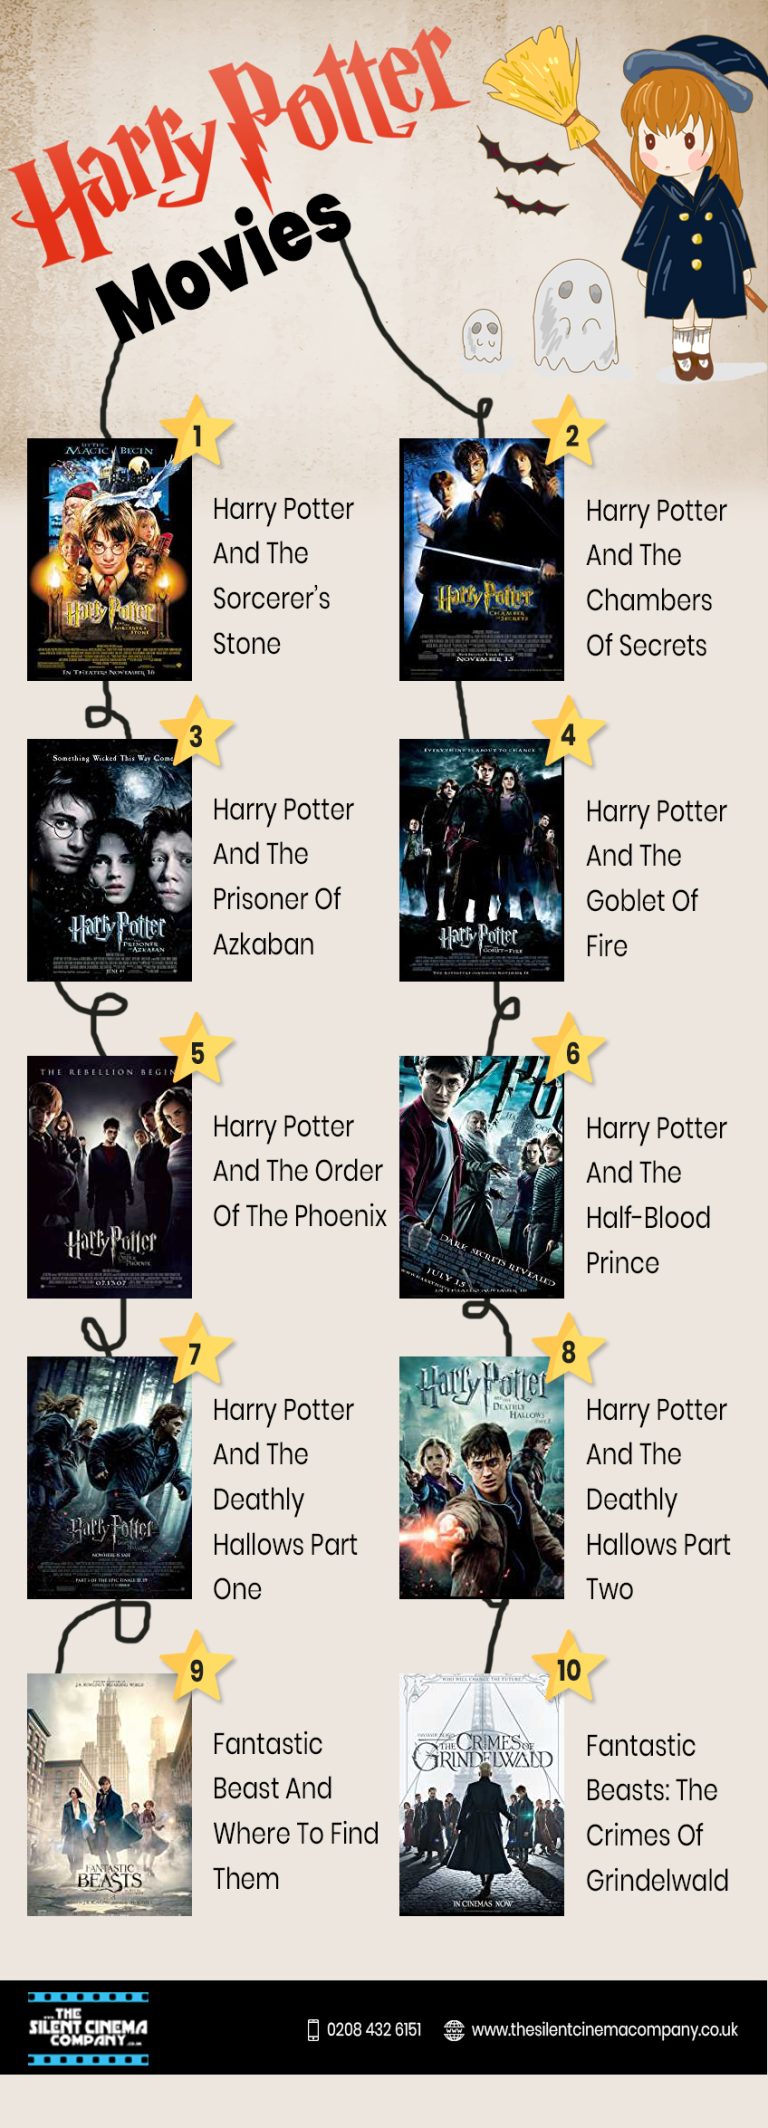 How Do The Harry Potter Movies Differ From The Fantastic Beasts Movies?